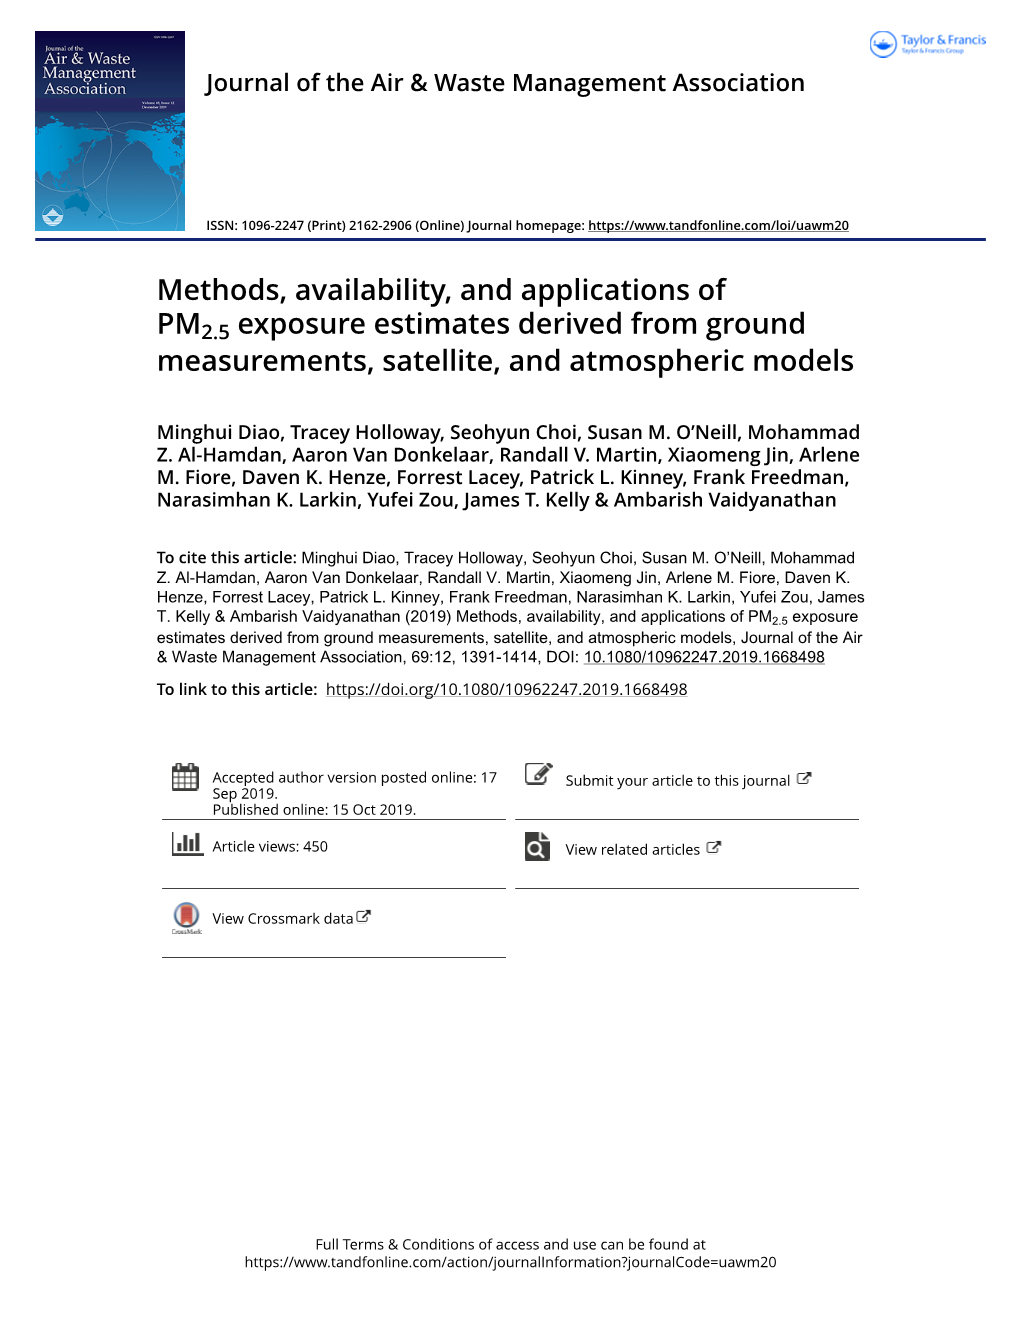 Methods, Availability, and Applications of PM2.5 Exposure Estimates Derived from Ground Measurements, Satellite, and Atmospheric Models